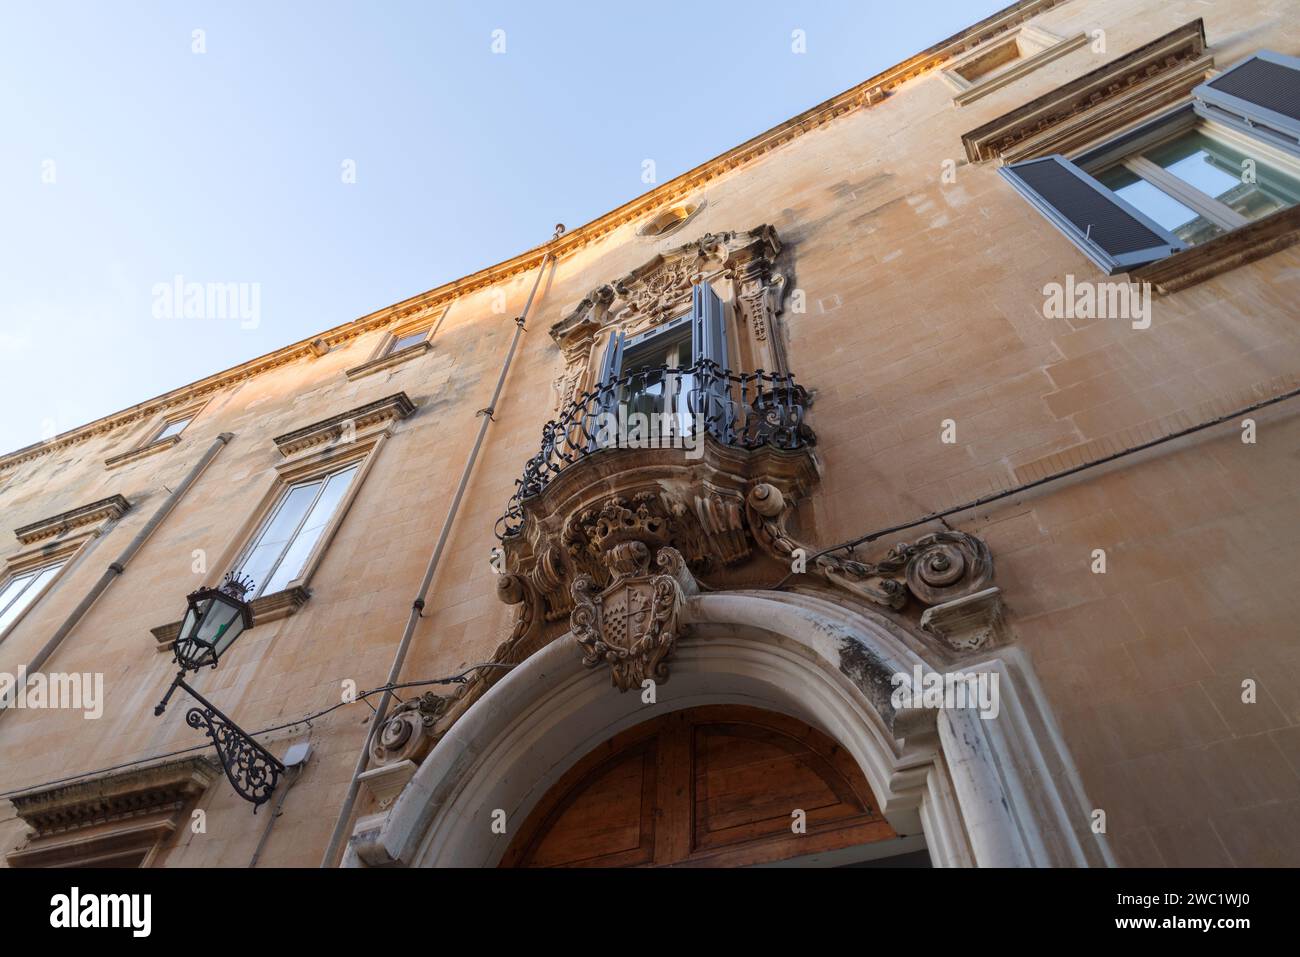 Stone carved decoration in Baroque style on the facade. Lecce, Puglia, Italy Stock Photo